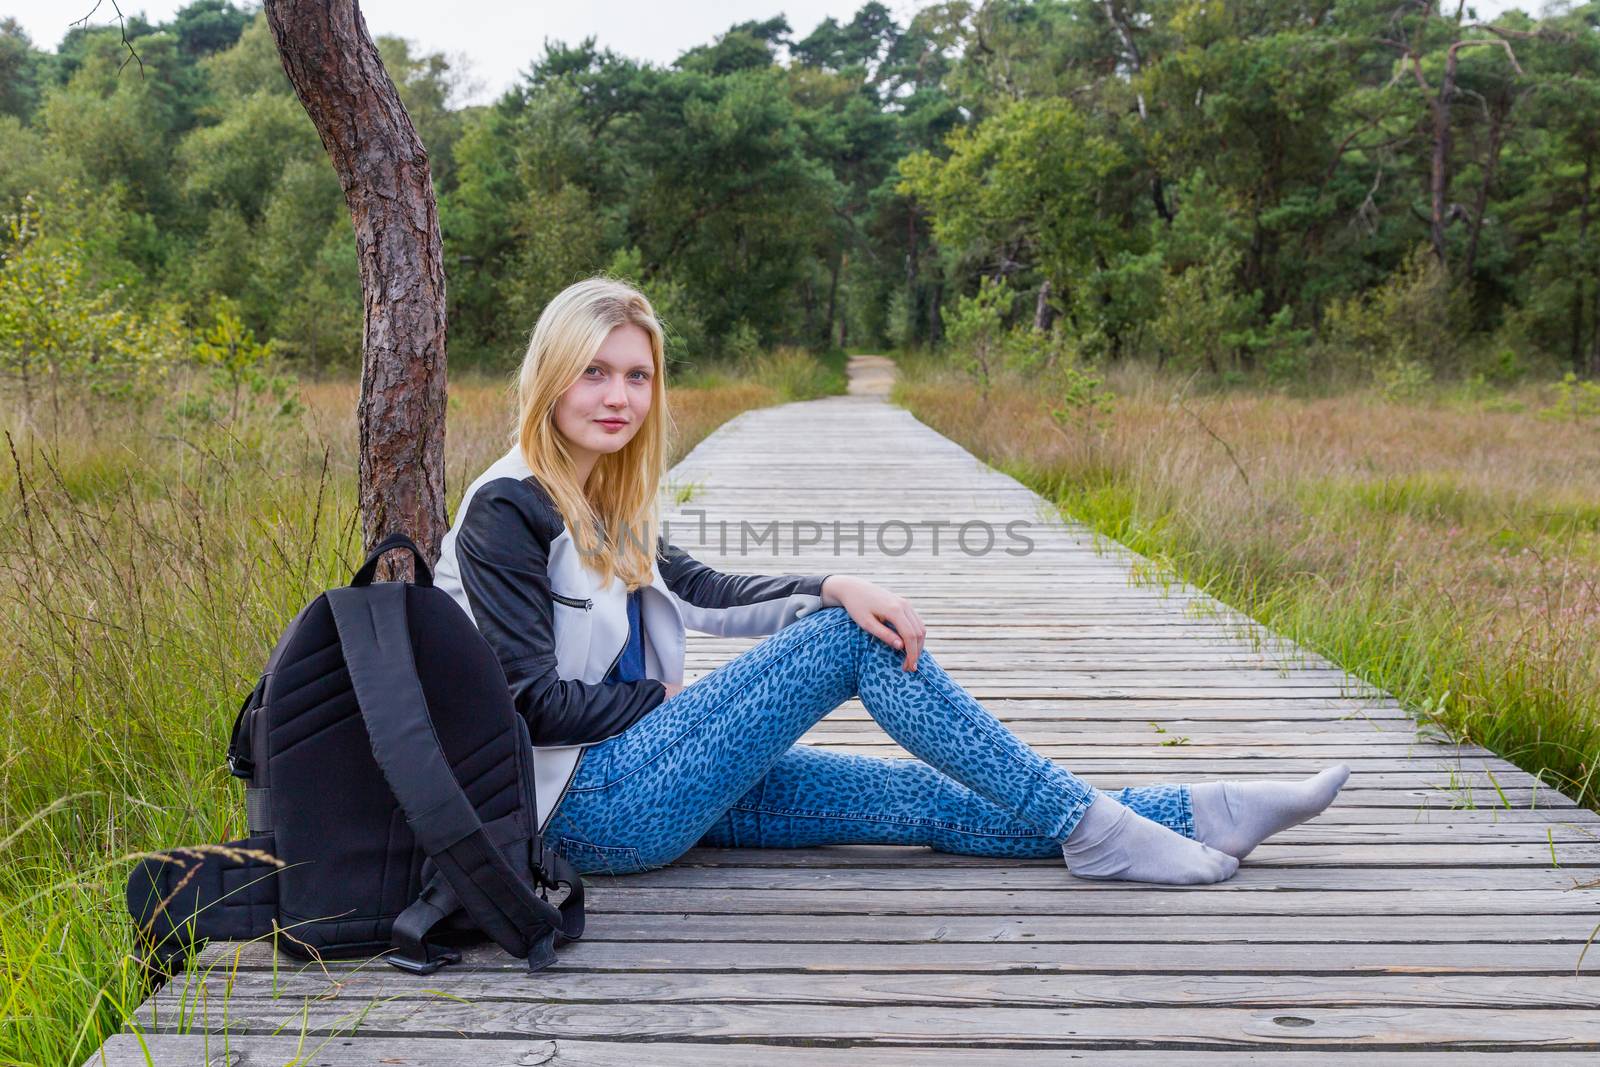 Blonde girl resting on wooden path in nature by BenSchonewille